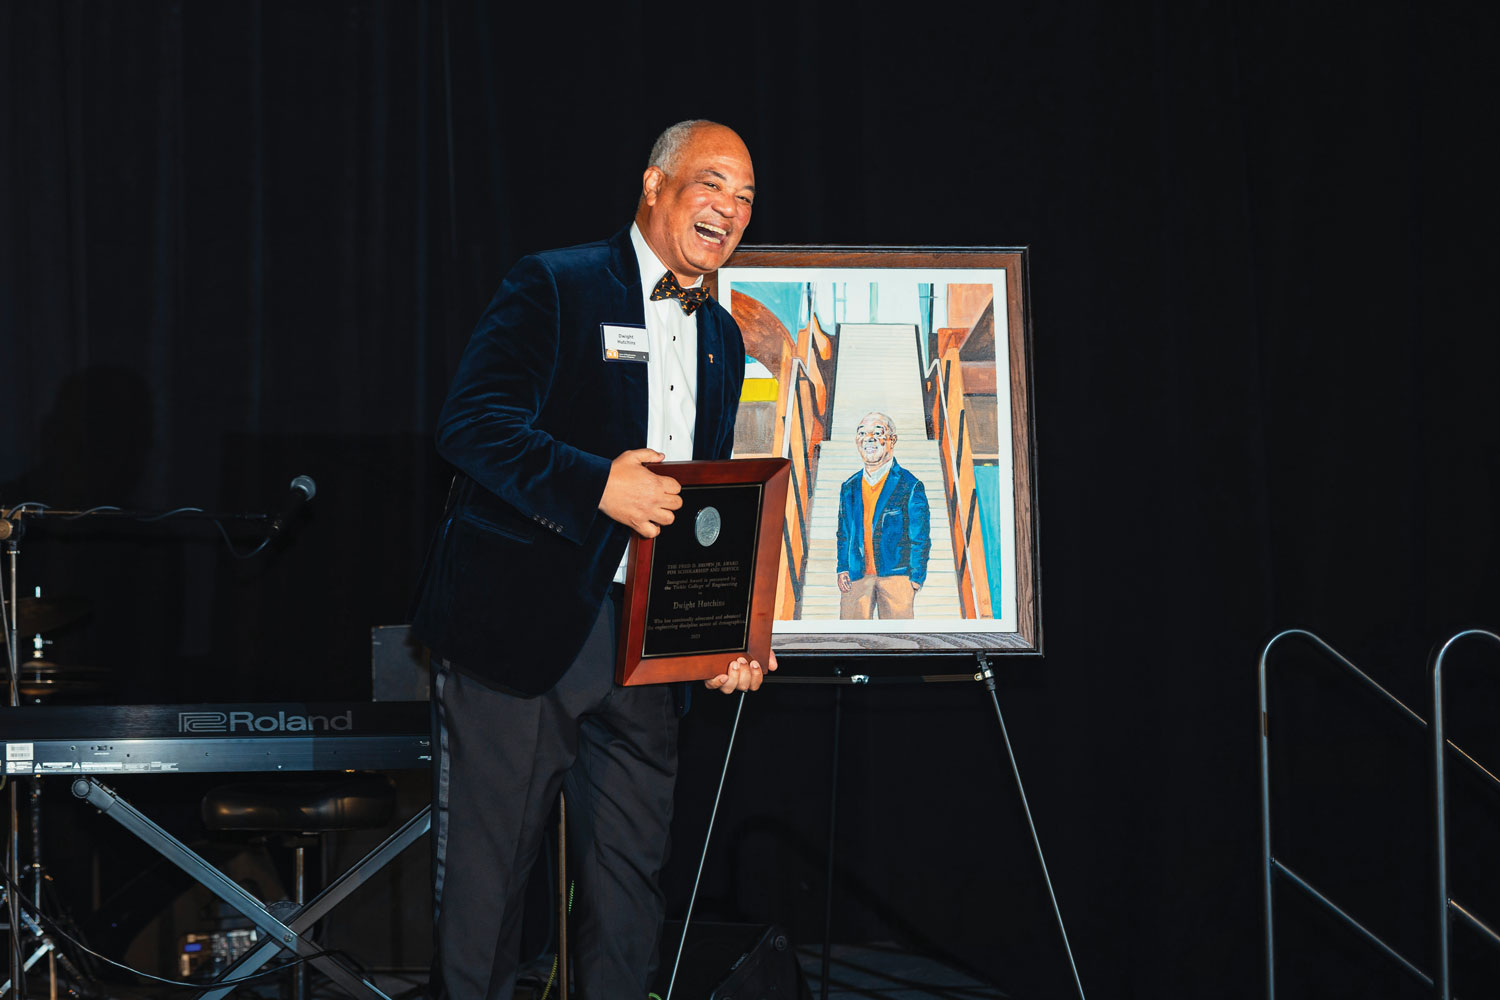 Dwight Hutchins posing for a photo with his award on stage